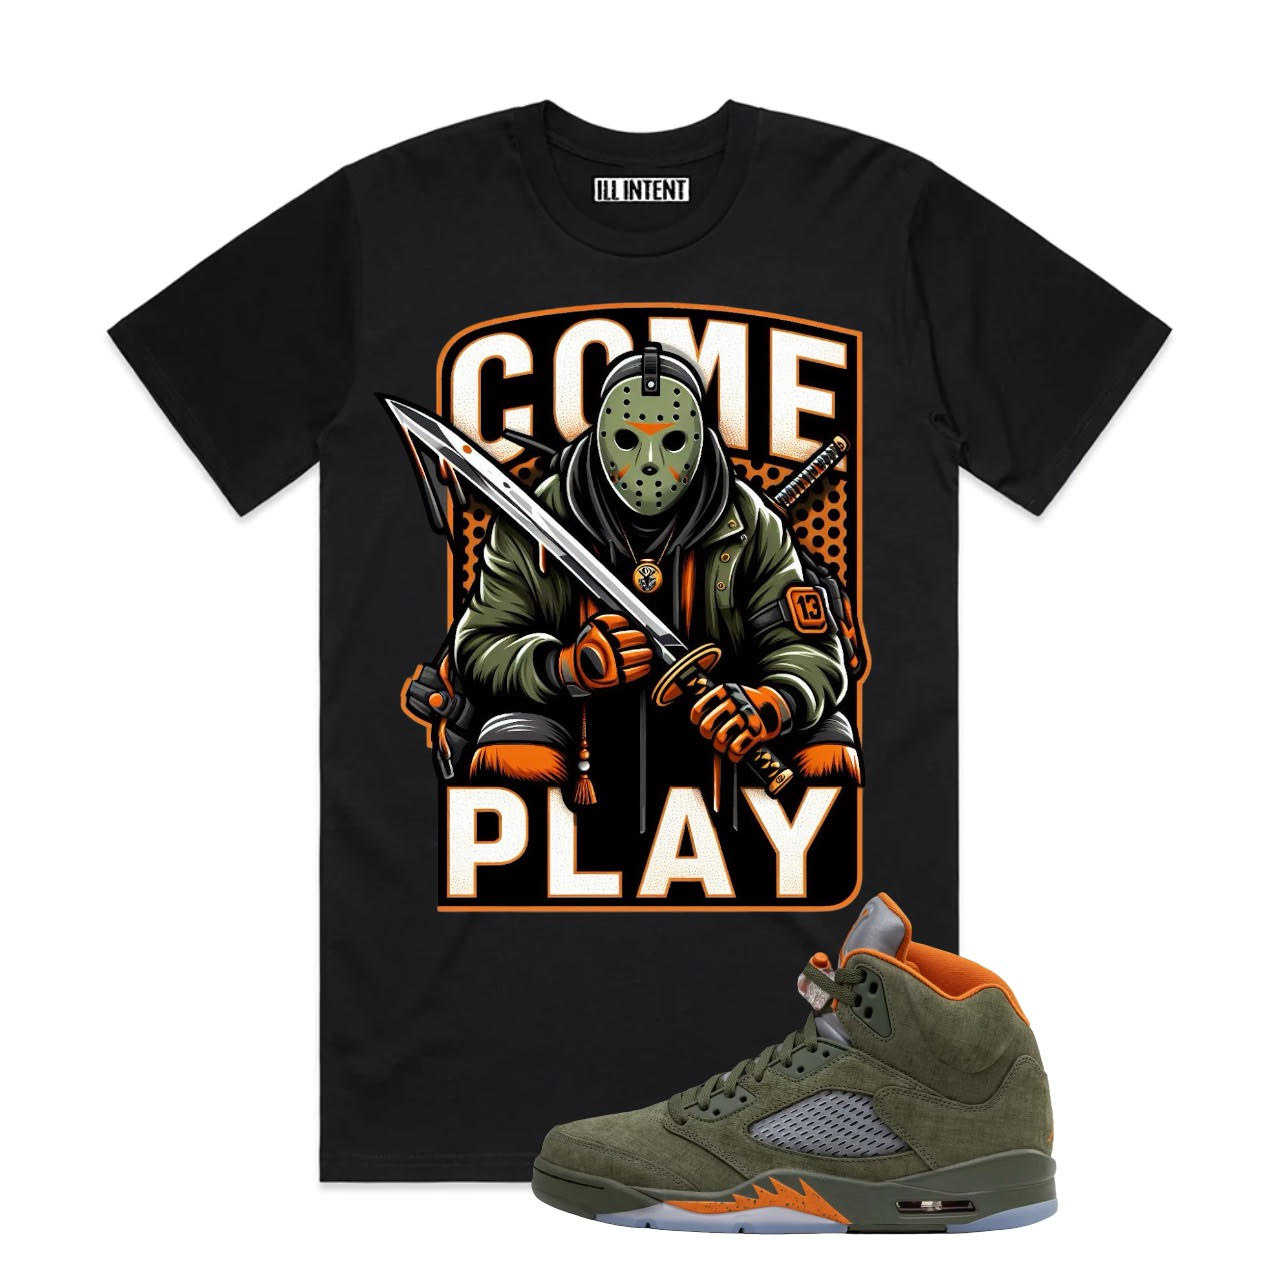 COME PLAY J5 OLIVE TEE